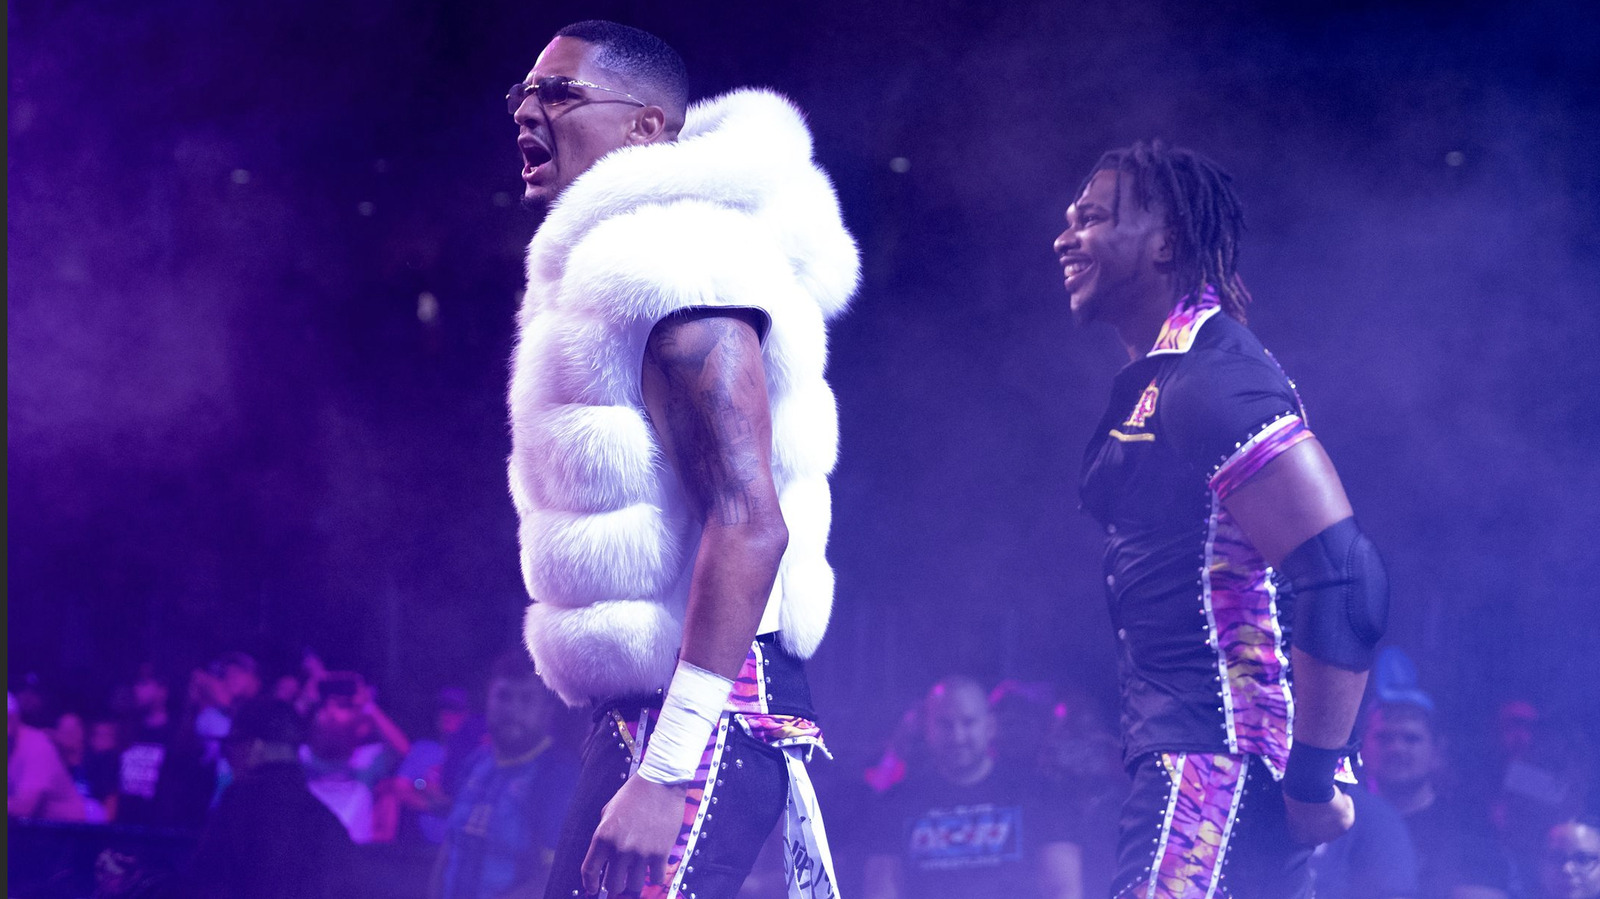 AEW Rampage Live Coverage 7/26 – High Stakes Royal Rampage Match, Four Way Tag Team Bout & More